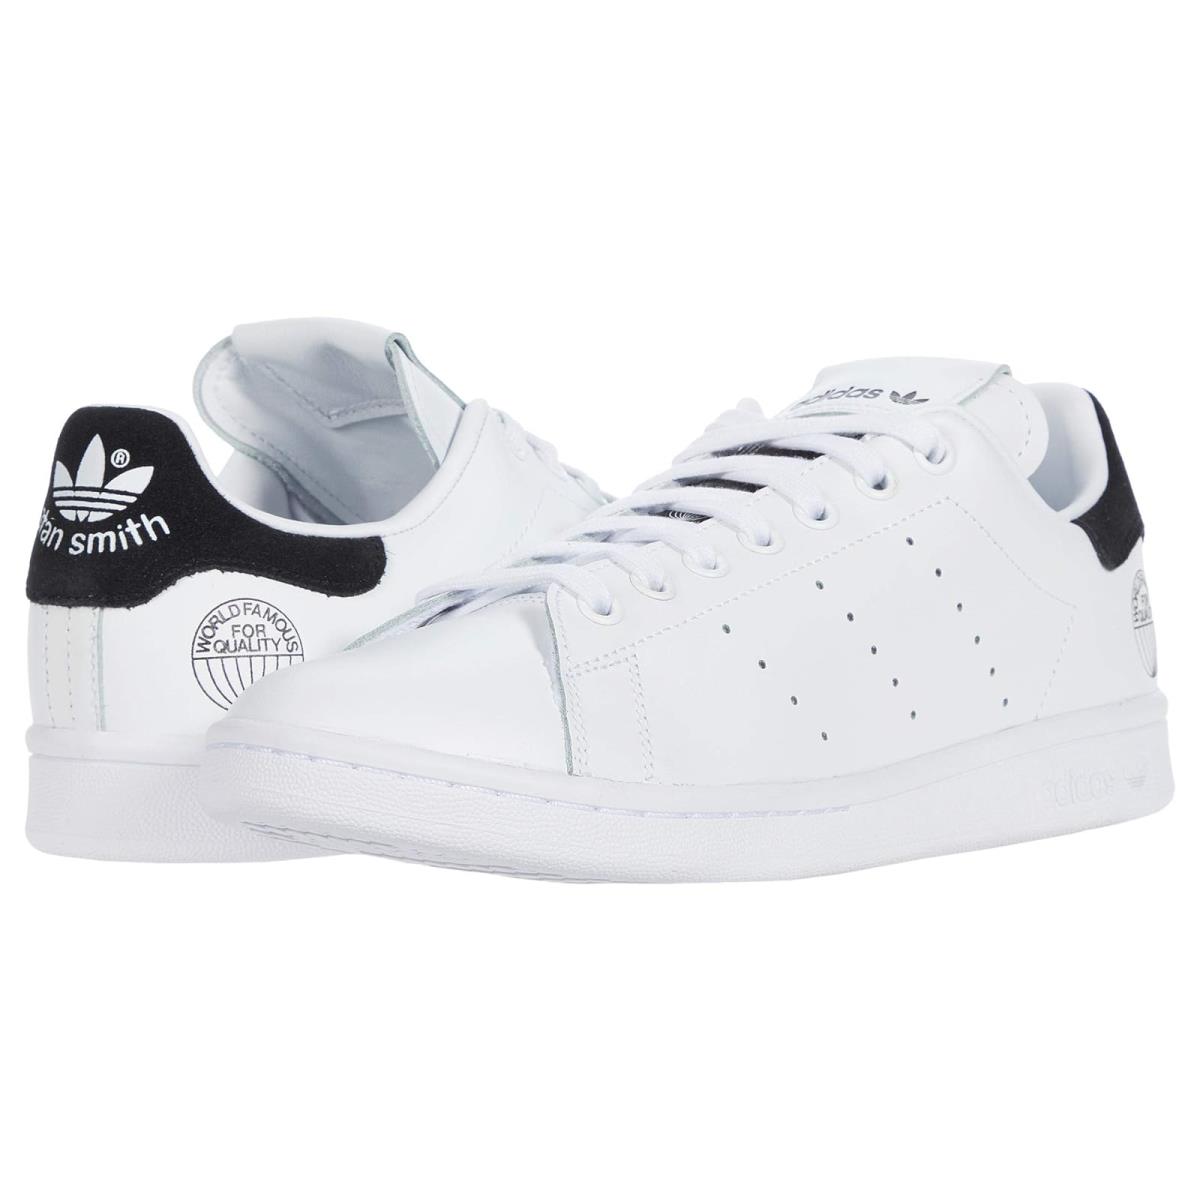 Man`s Sneakers Athletic Shoes Adidas Originals Stan Smith Footwear White/Footwear White/Core Black